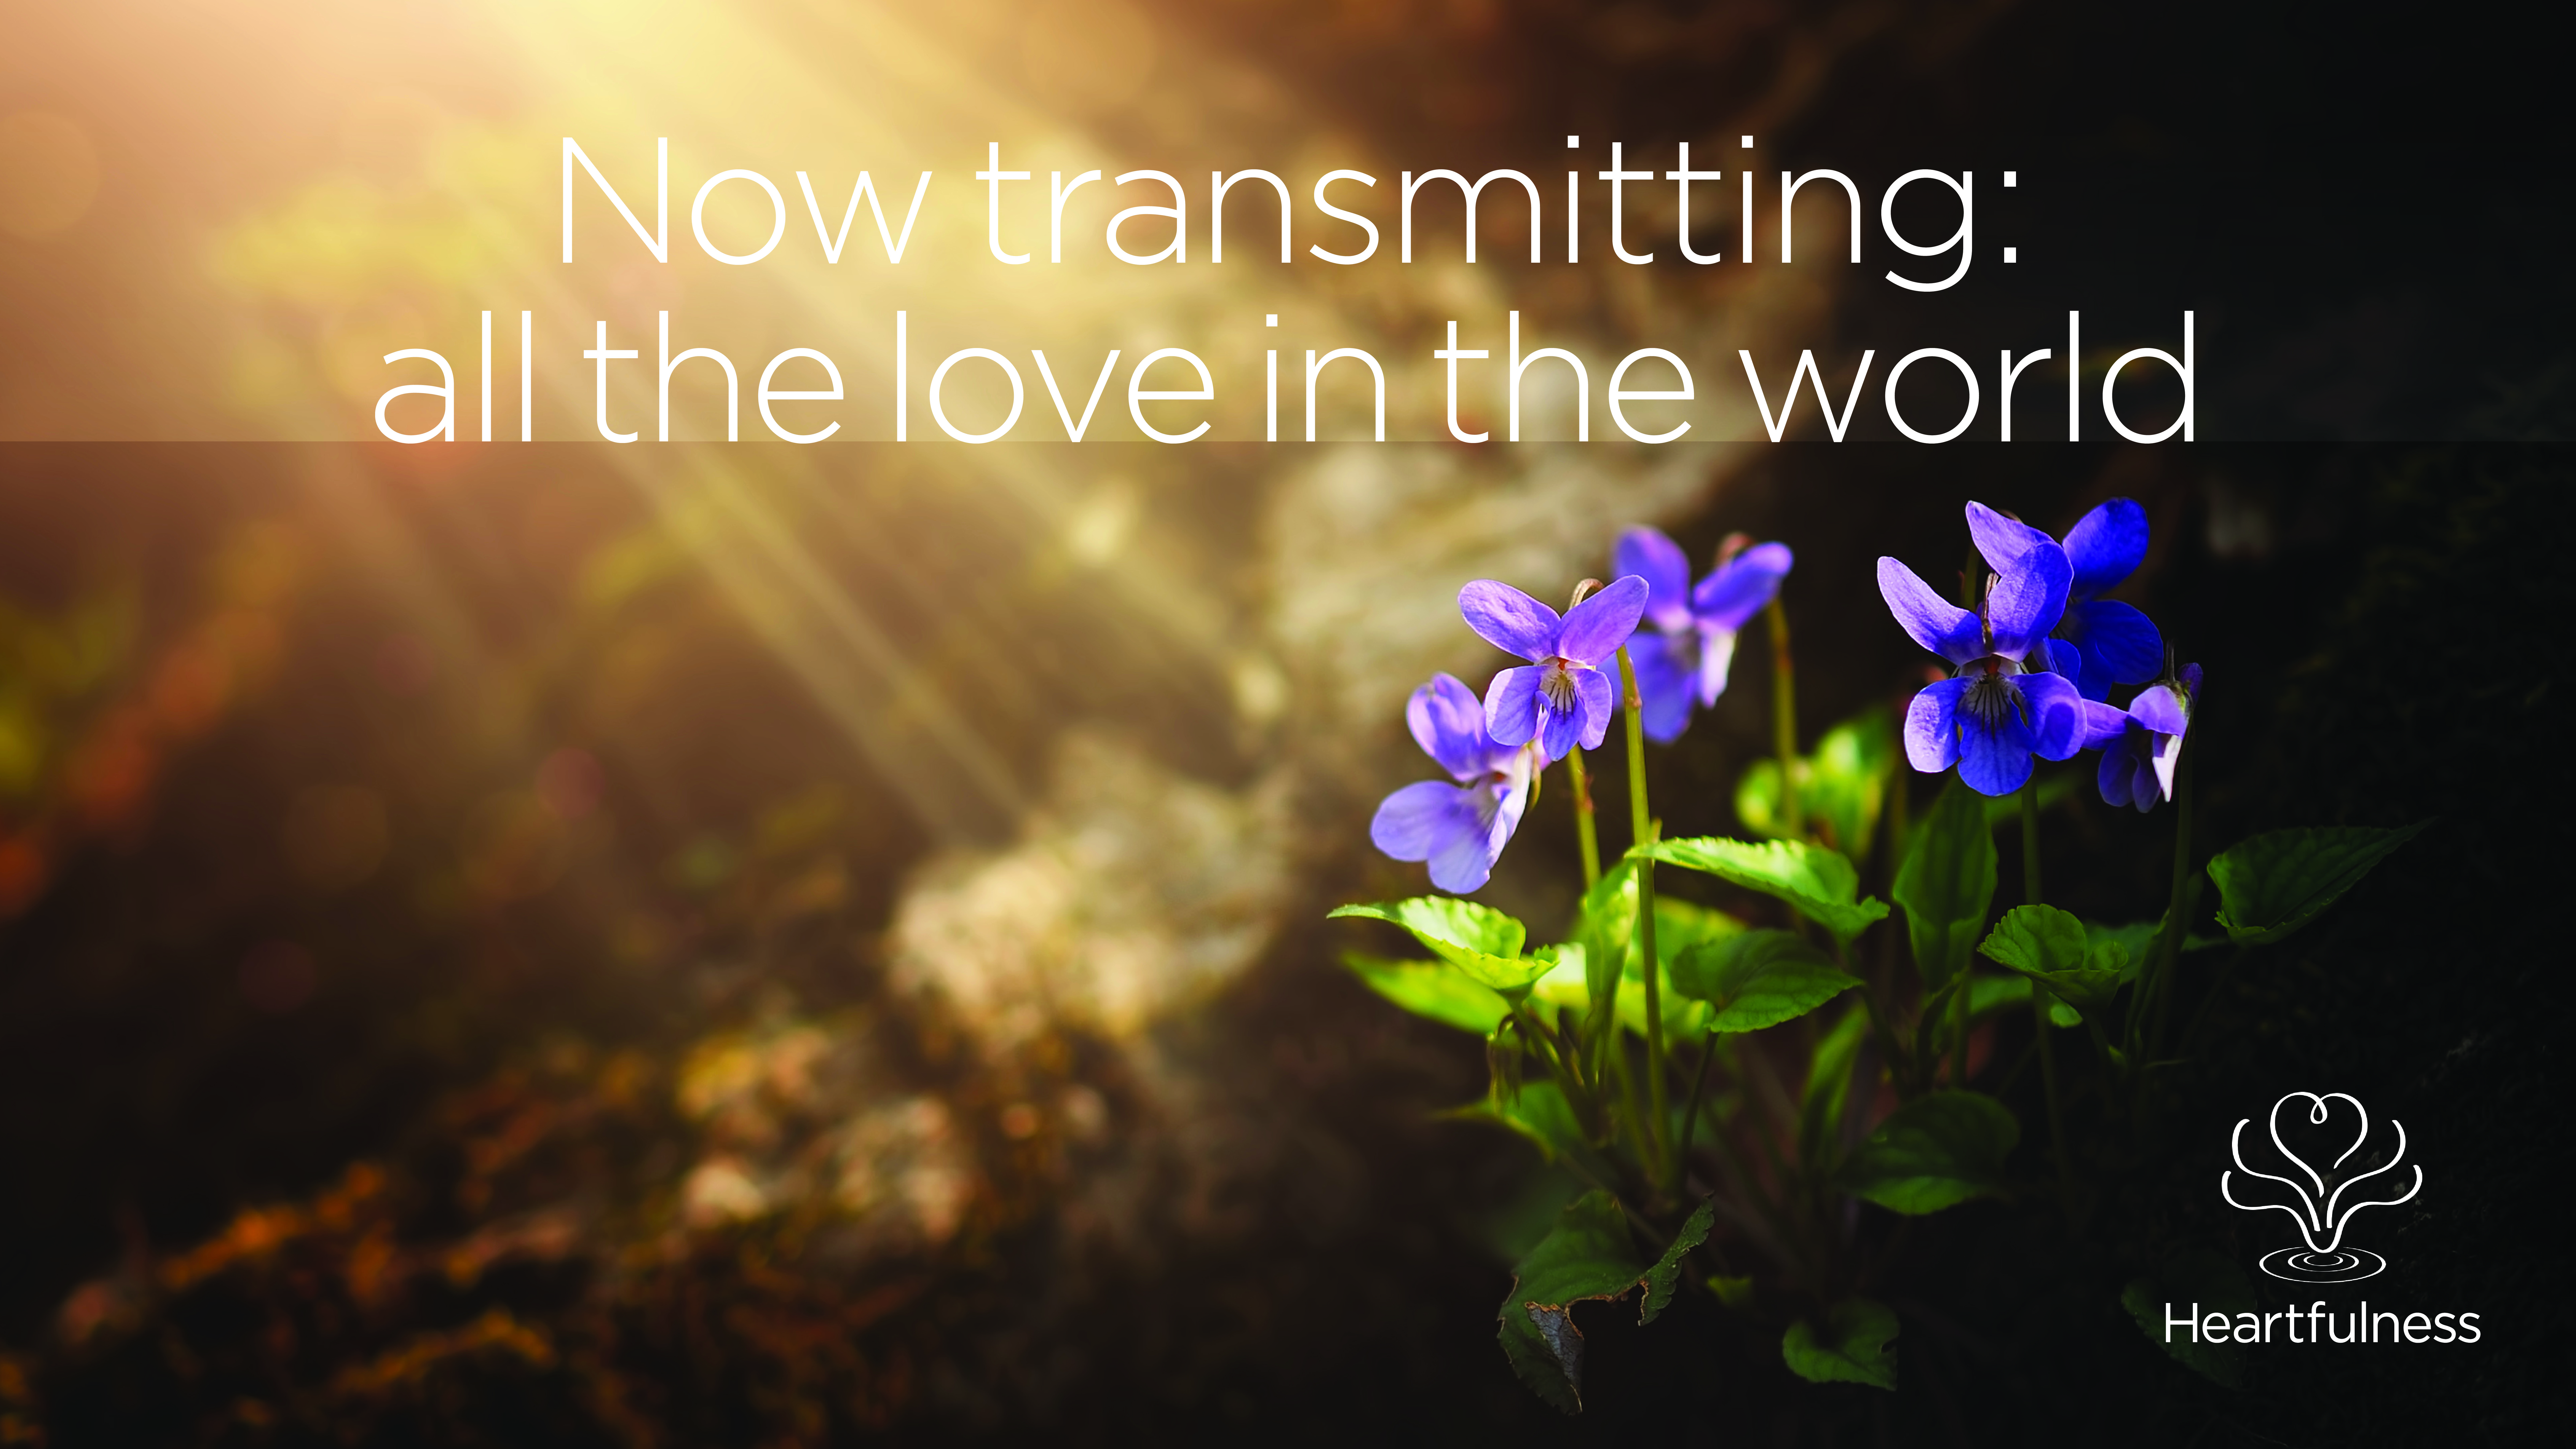 Heartfulness Now transmitting all the love in the world